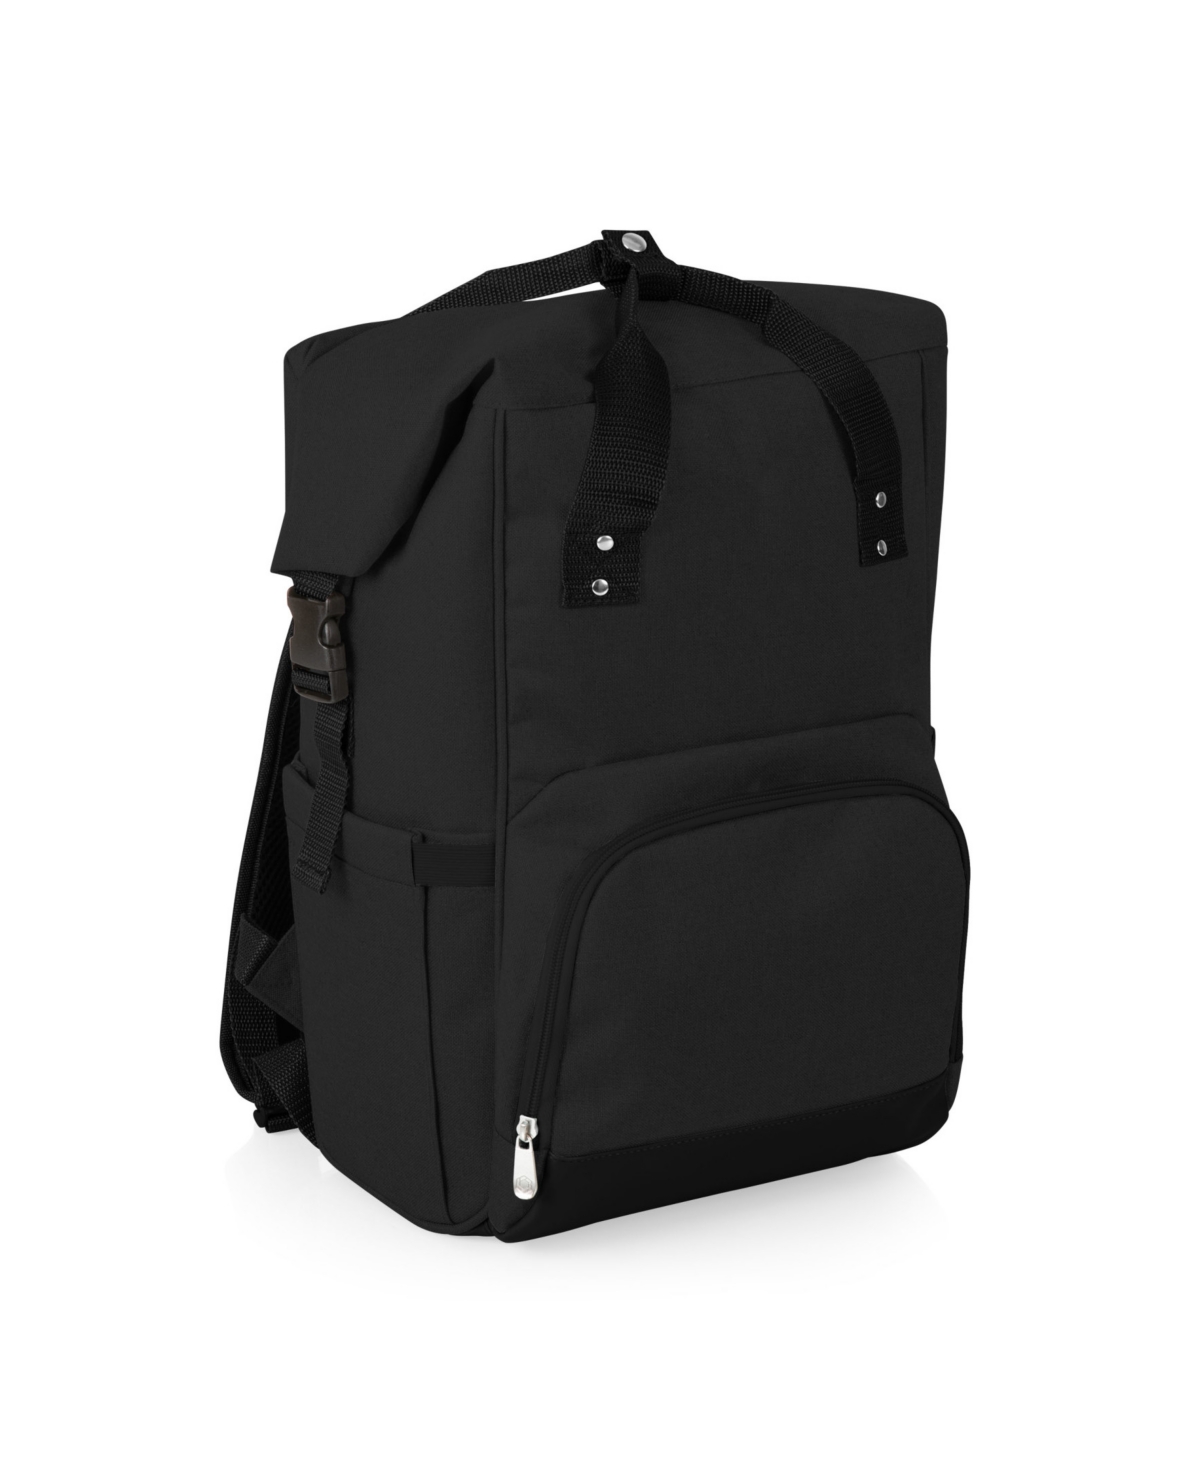 by Picnic Time On The Go Roll-Top Cooler Backpack - Black